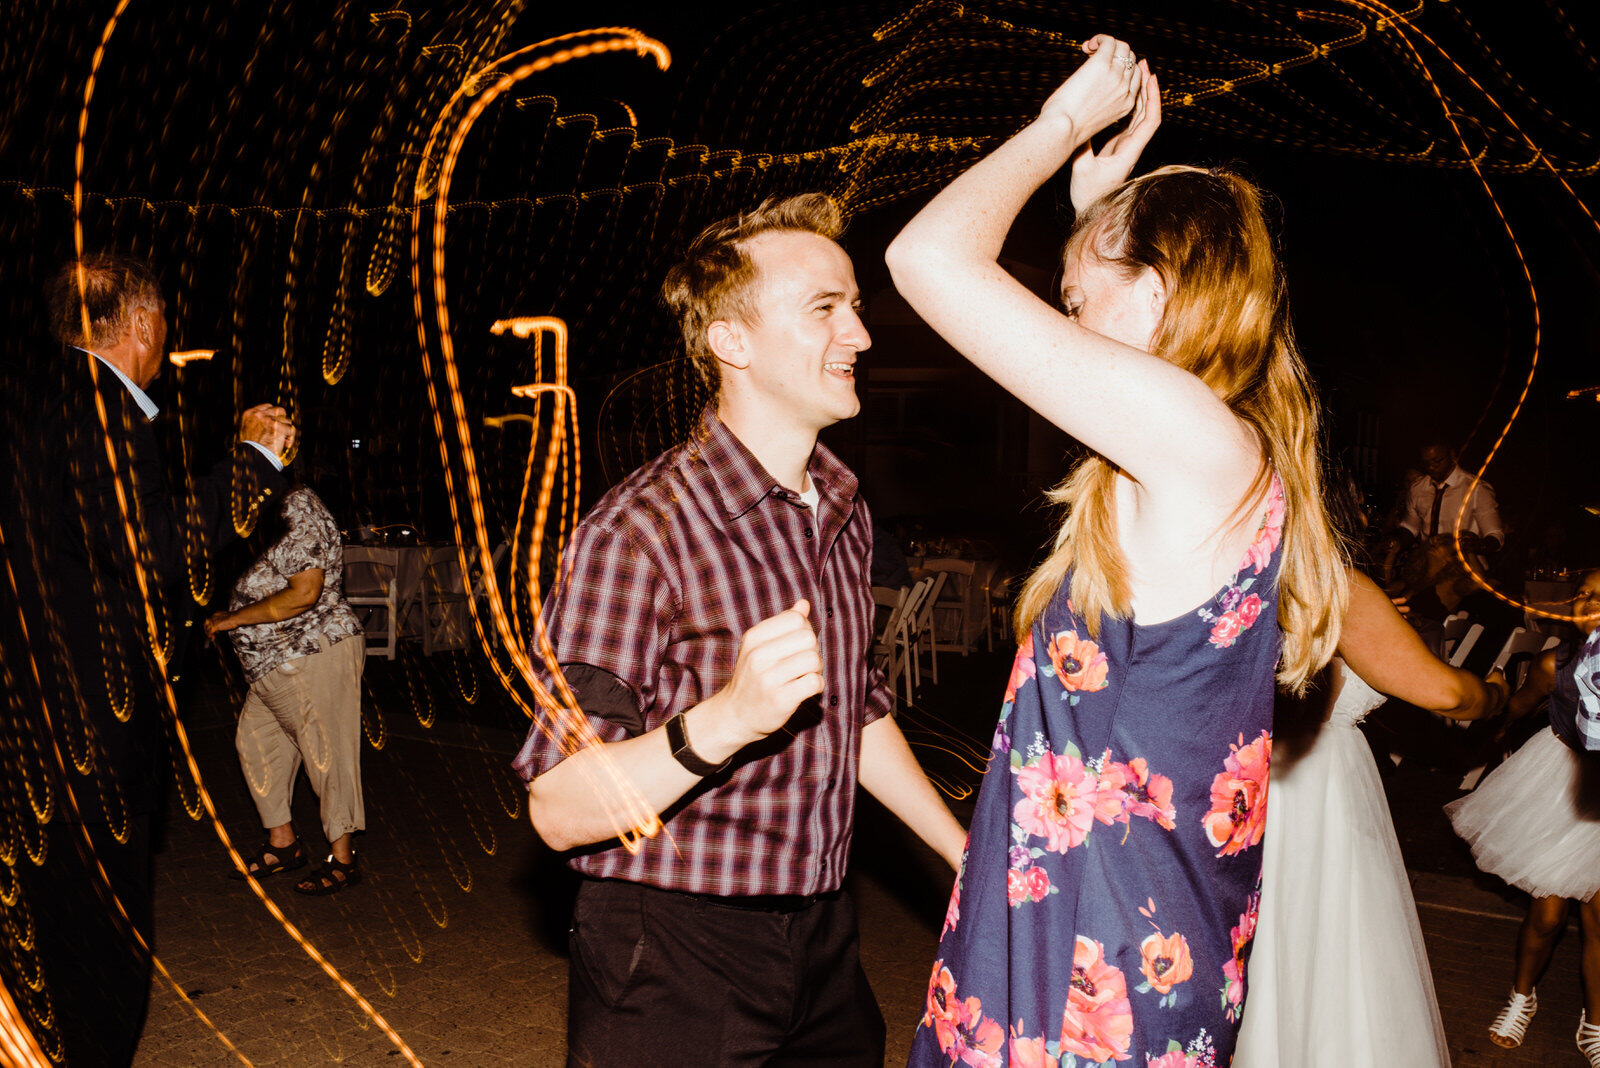 Fun and energetic reception photos at Heritage park wedding